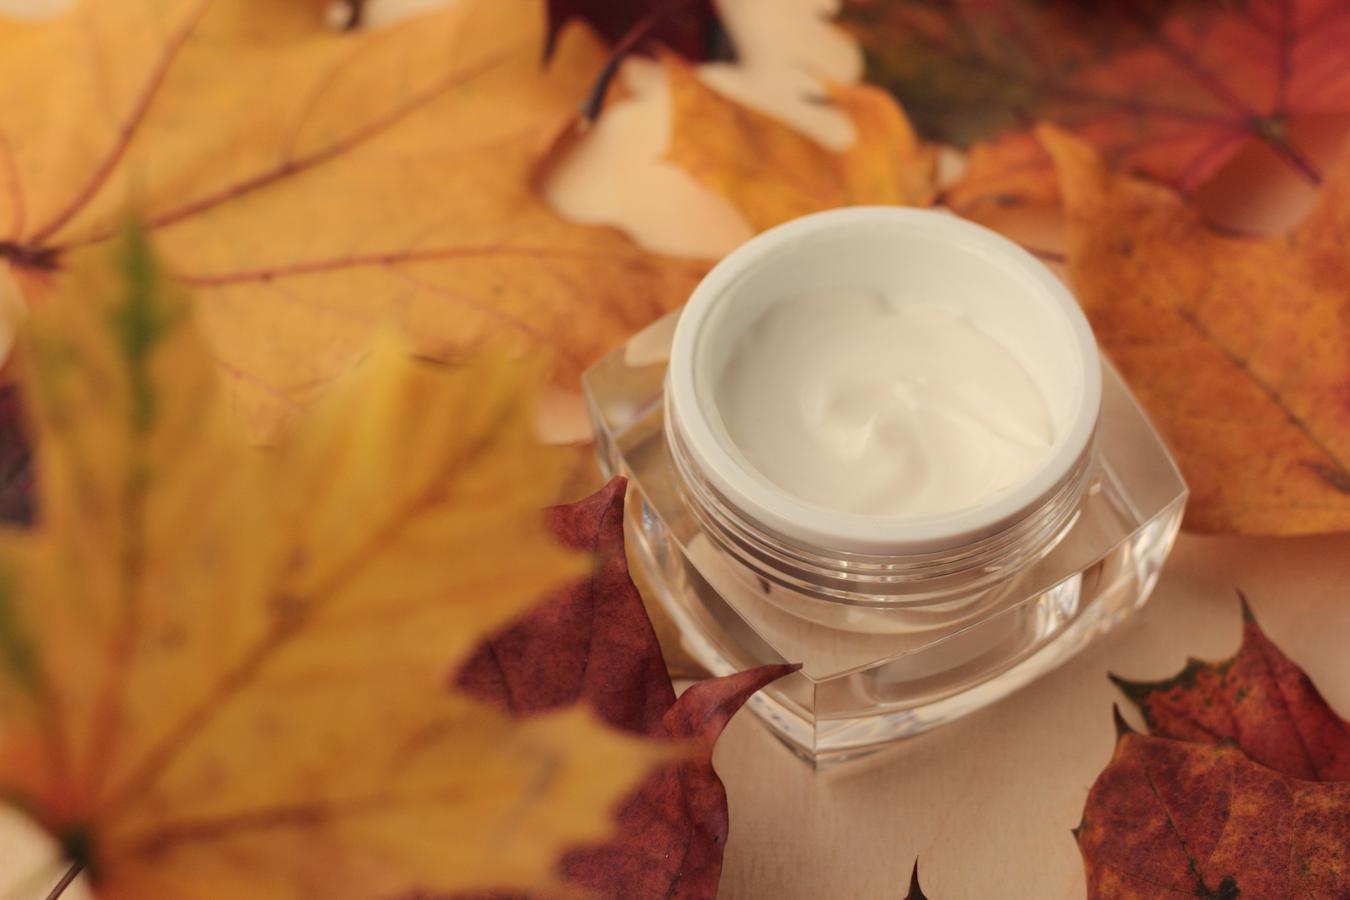 a glass jar of product on top of autumn leaves harmful uv rays wear sunscreen sun exposure at least spf body's largest organ face masks vitamin c combination skin care routine skin